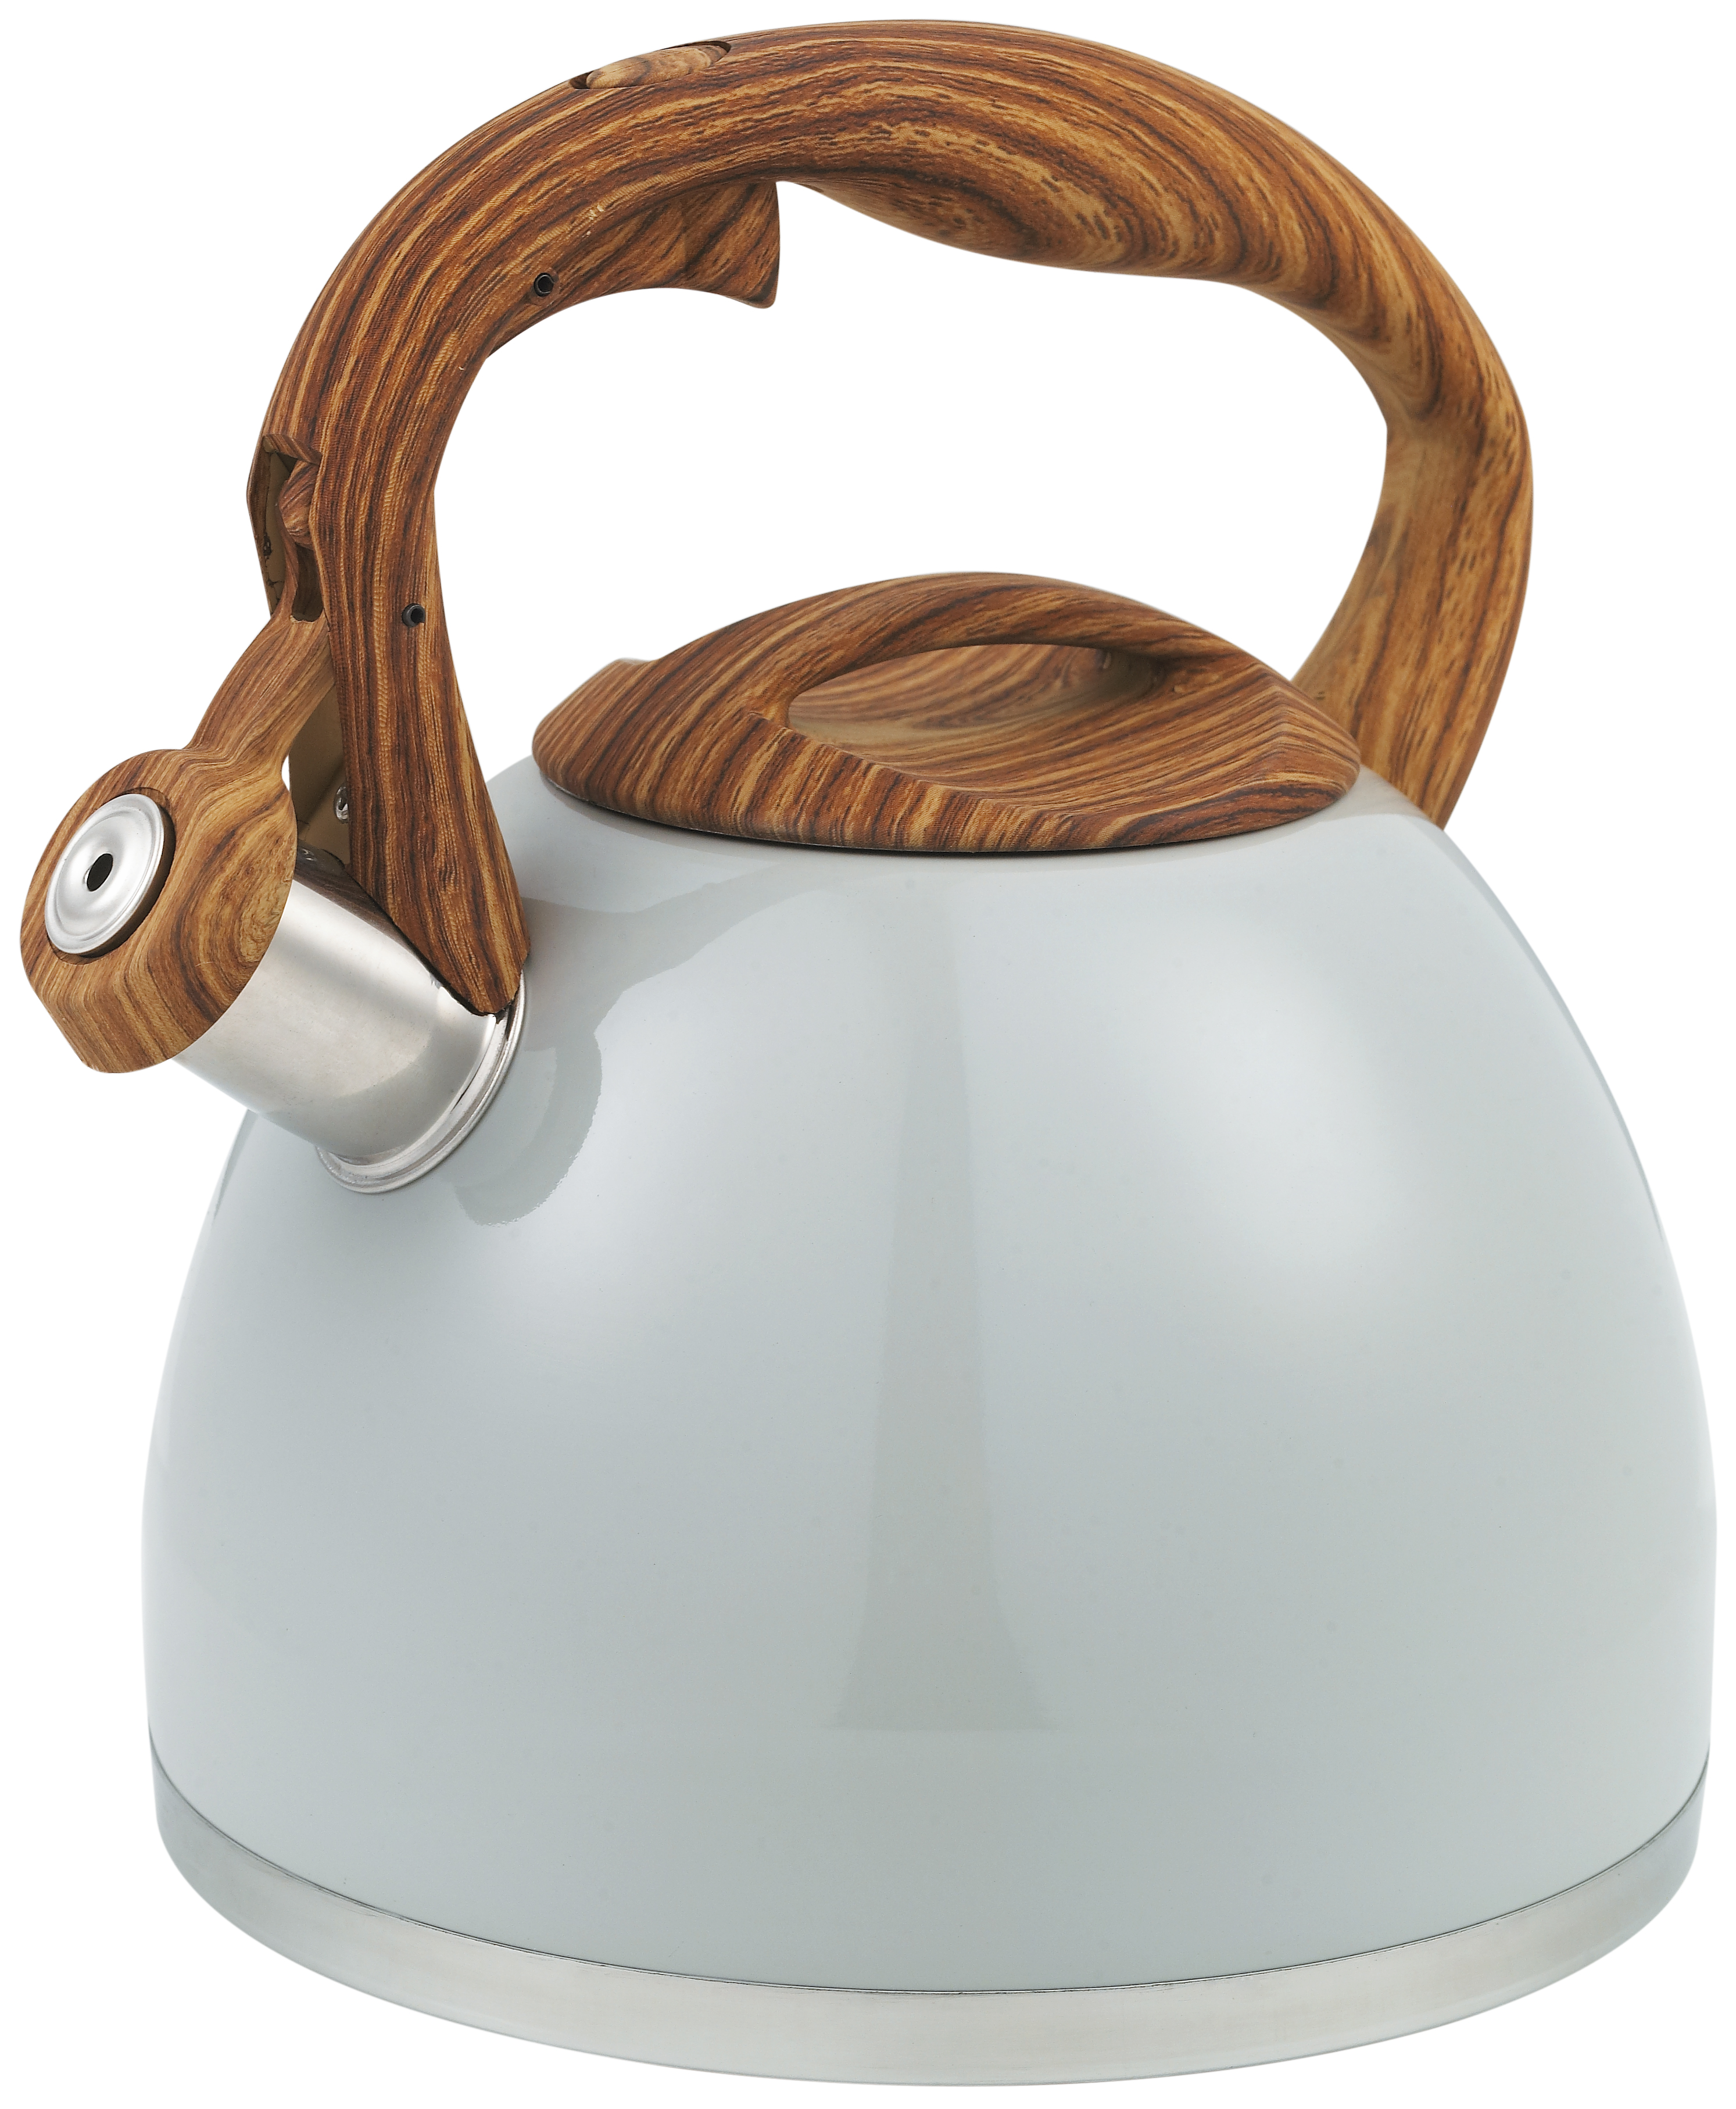 Best Selling Elegant Appearance Cookware Set Stainless Steel Whistle Kettle Teapot with Color Coating